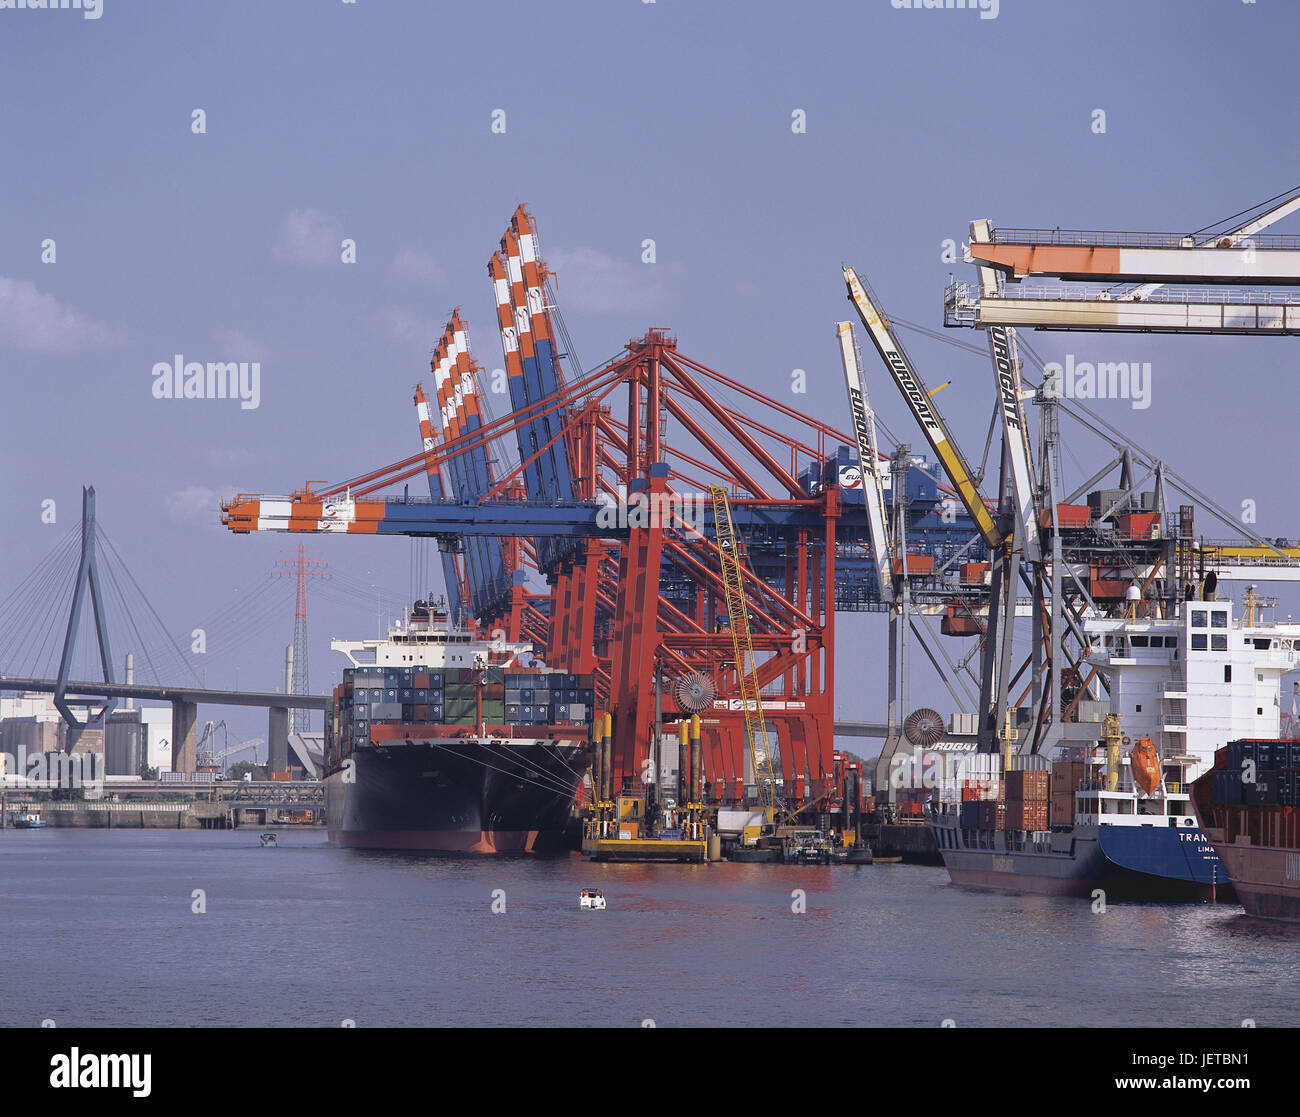 Germany, Hamburg, container port, loading engines, town, harbour, ships, freighters, freighters, charge, export, import, ship, container, navigation, economy, container terminal, eurogates, Verladebrücken, Stock Photo